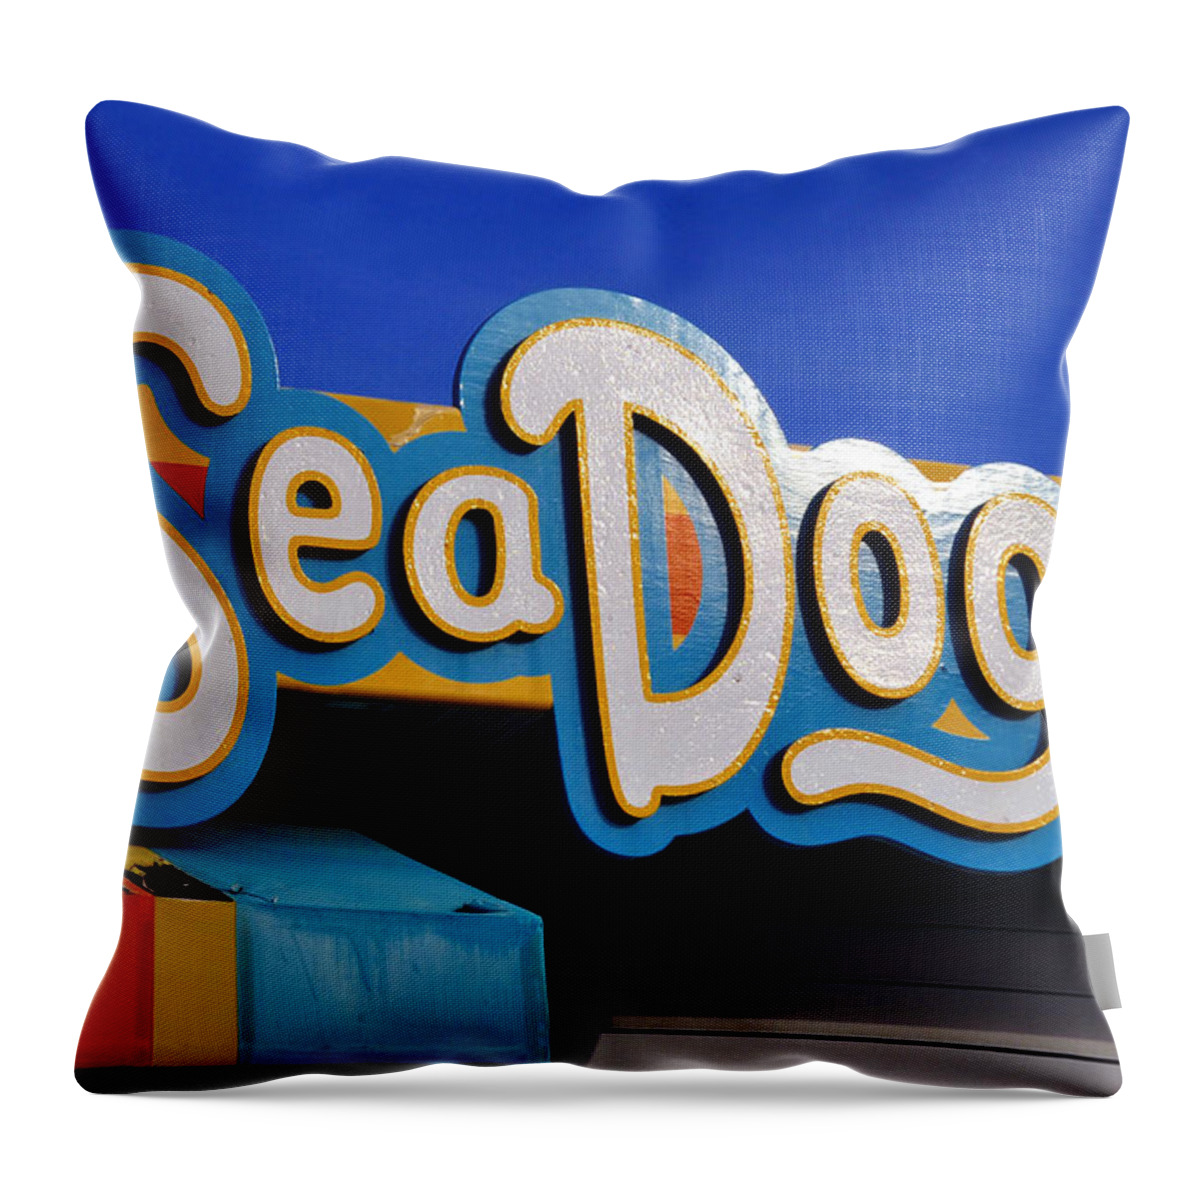 Sea Dogs Throw Pillow featuring the photograph Sea Dogs sign by David Lee Thompson